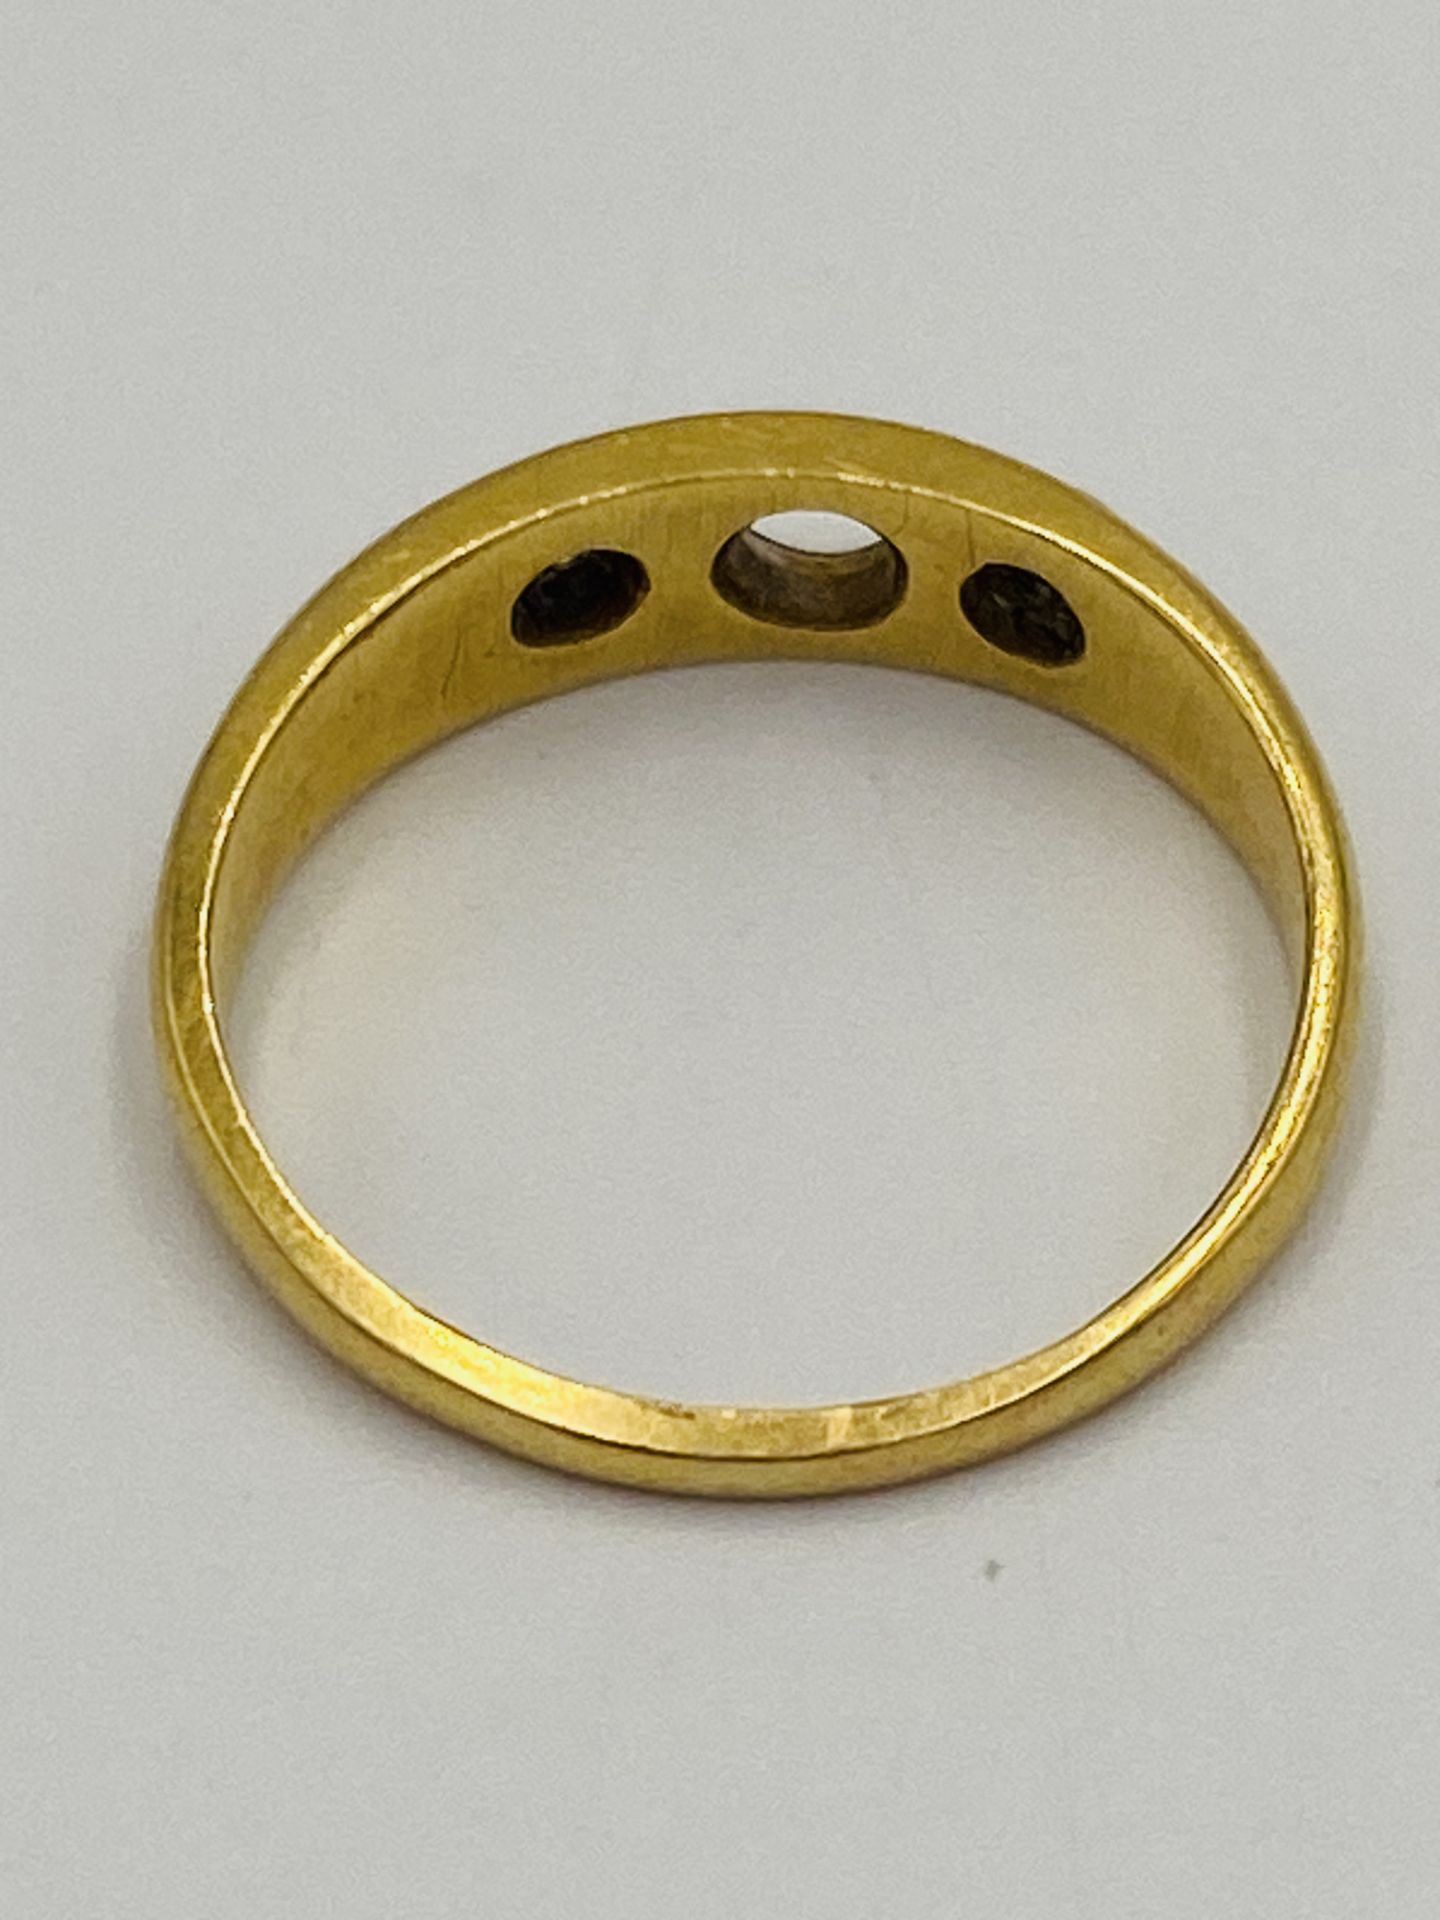 18ct gold ring - Image 2 of 6